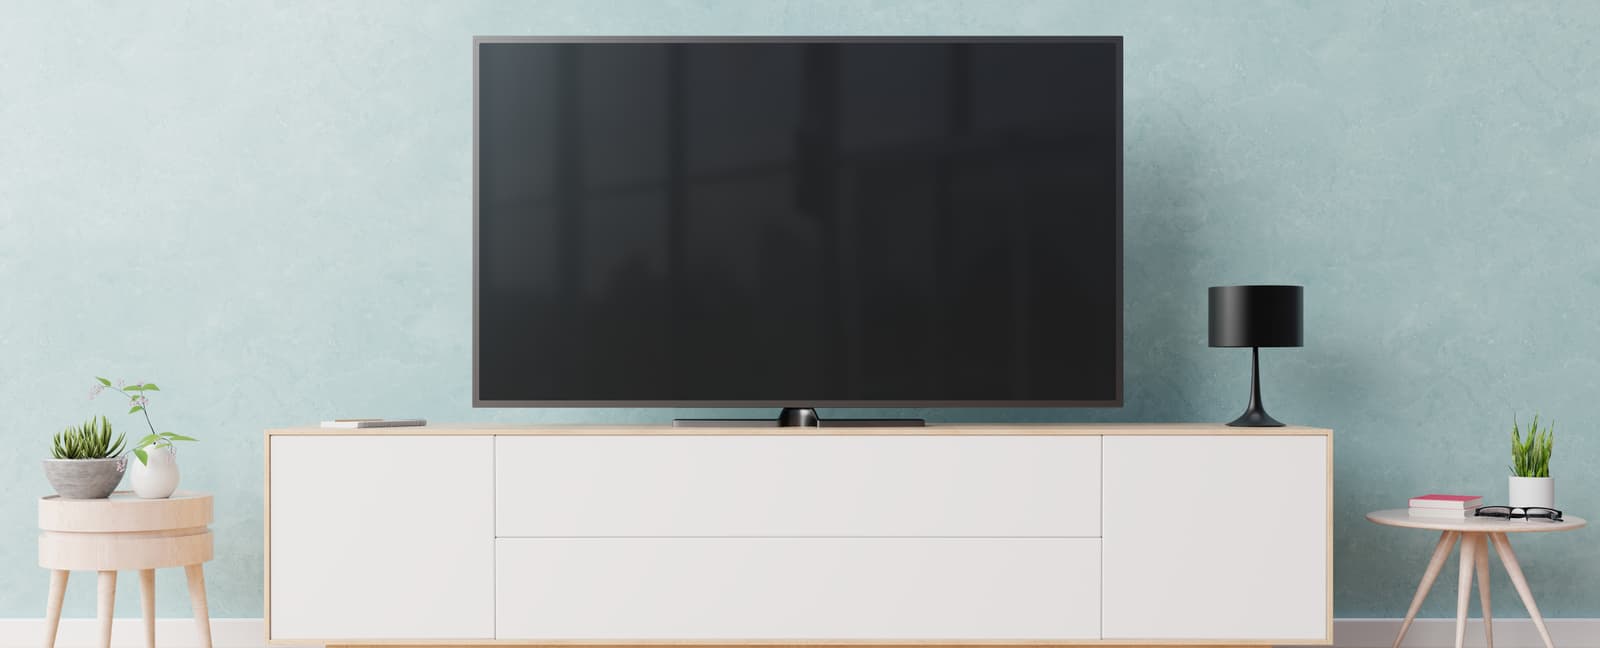 White Colour TV Cabinet With Small Wooden Table on Both the Side For Living Room - Beautiful Homes